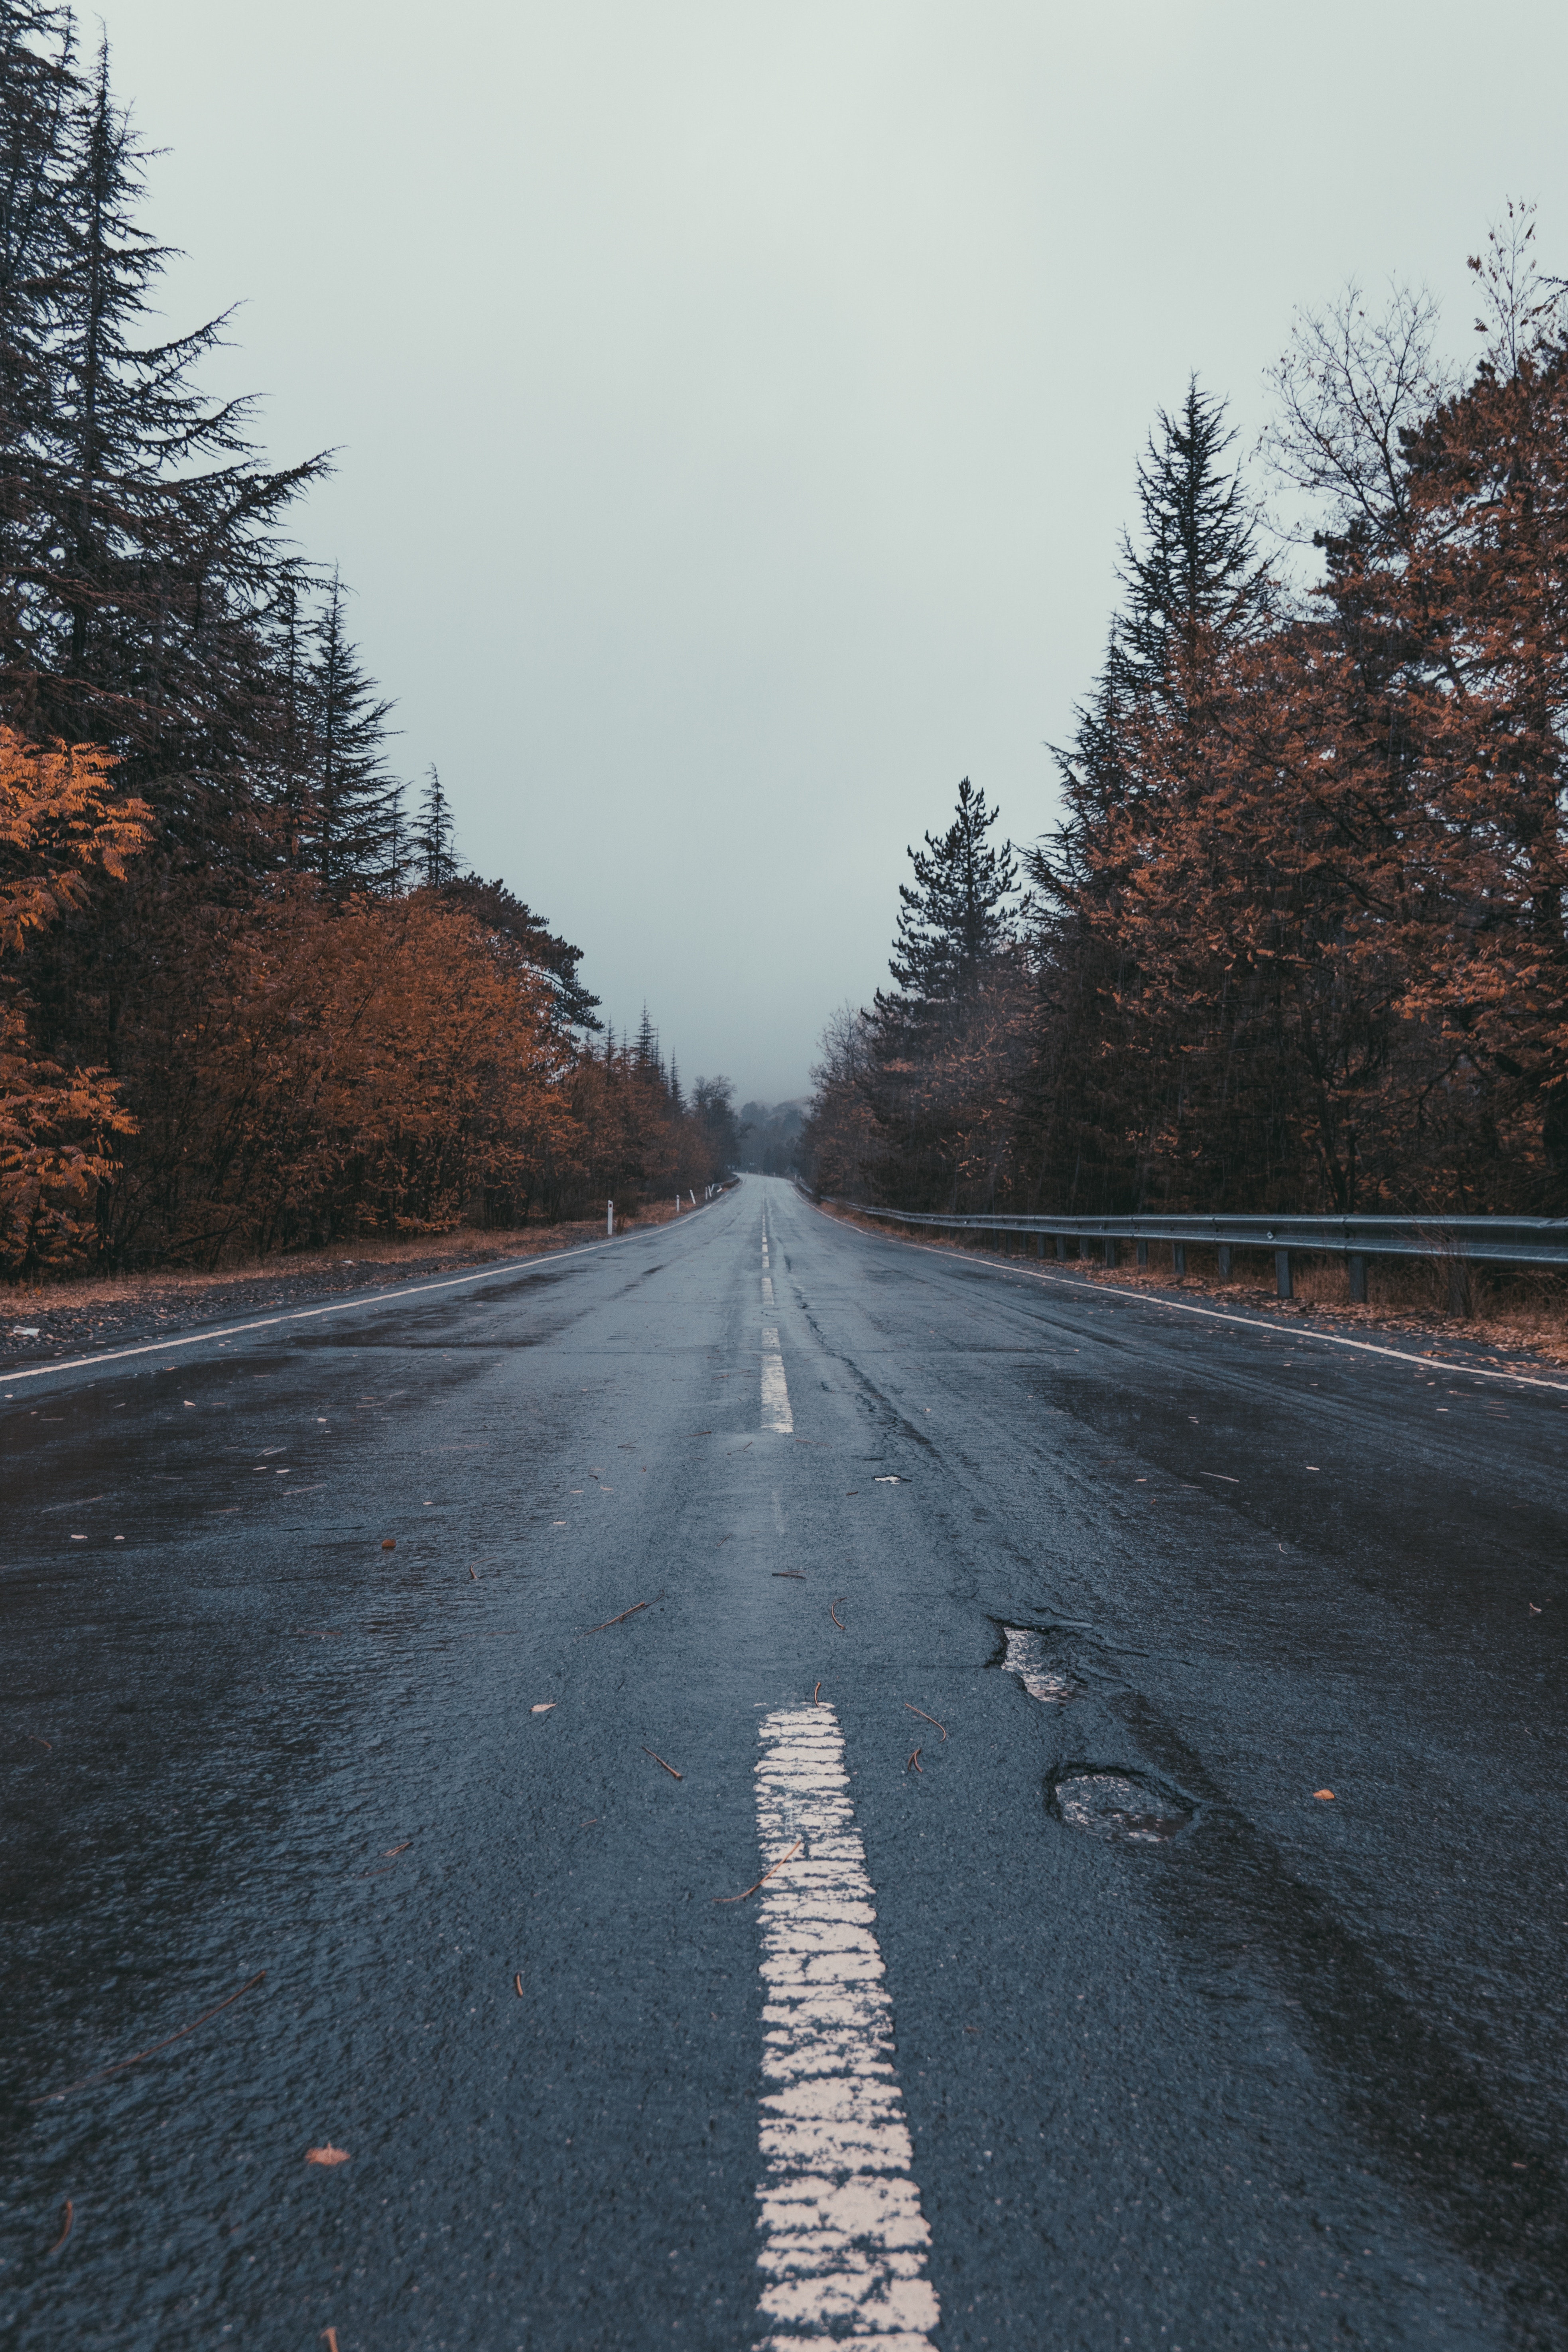 mainly cloudy, nature, trees, road, markup, overcast phone background